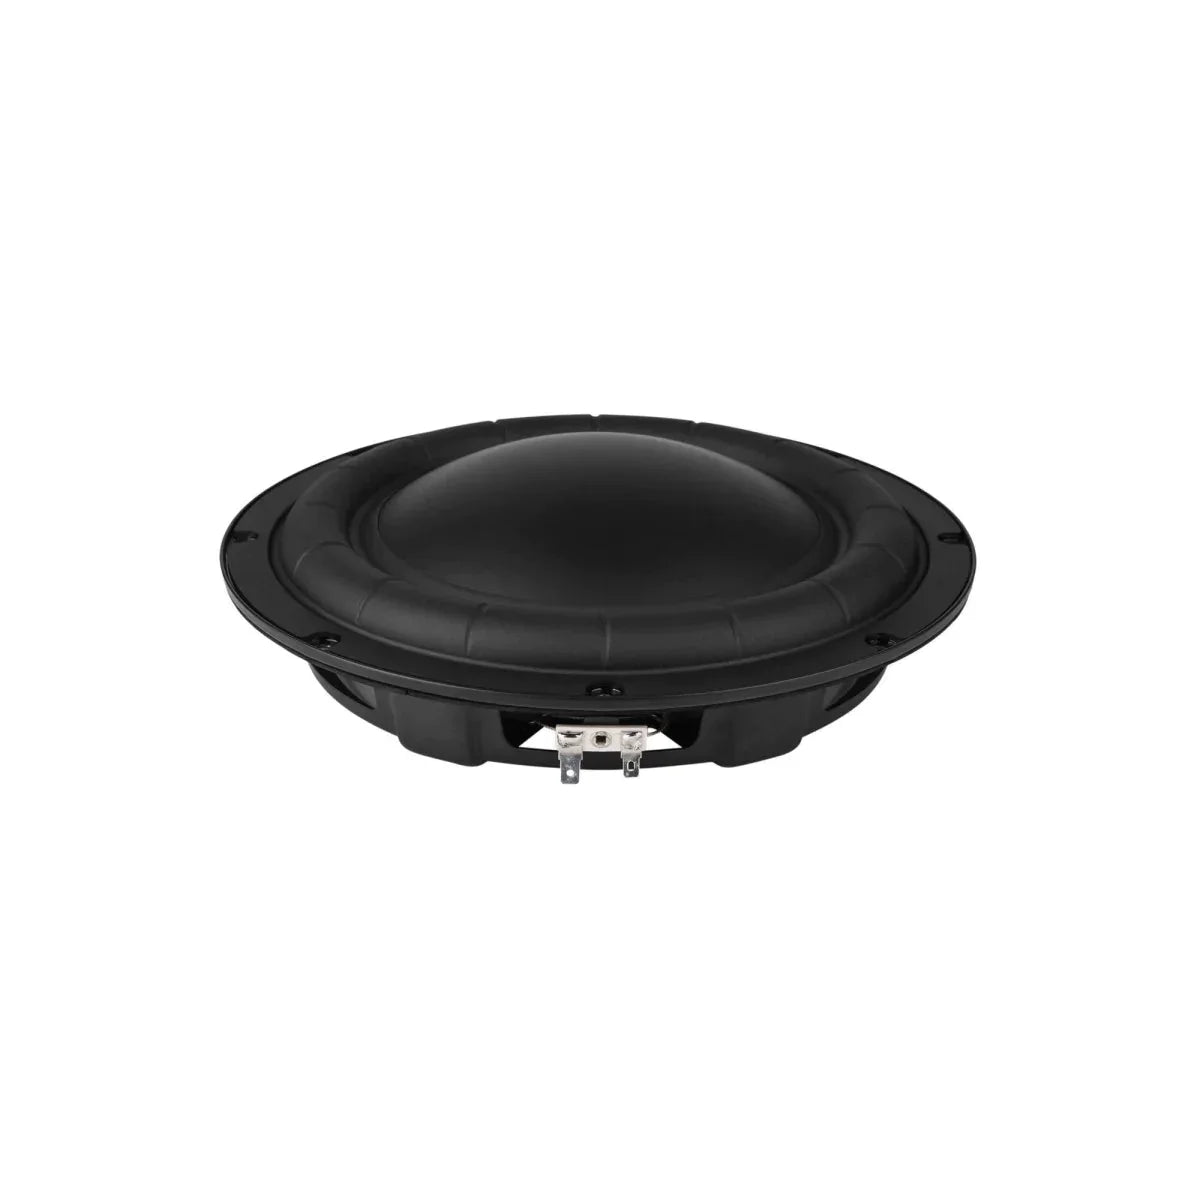 Peerless by Tymphany-GBS-250F38CP01-04-10" (25cm) Subwoofer-Masori.de